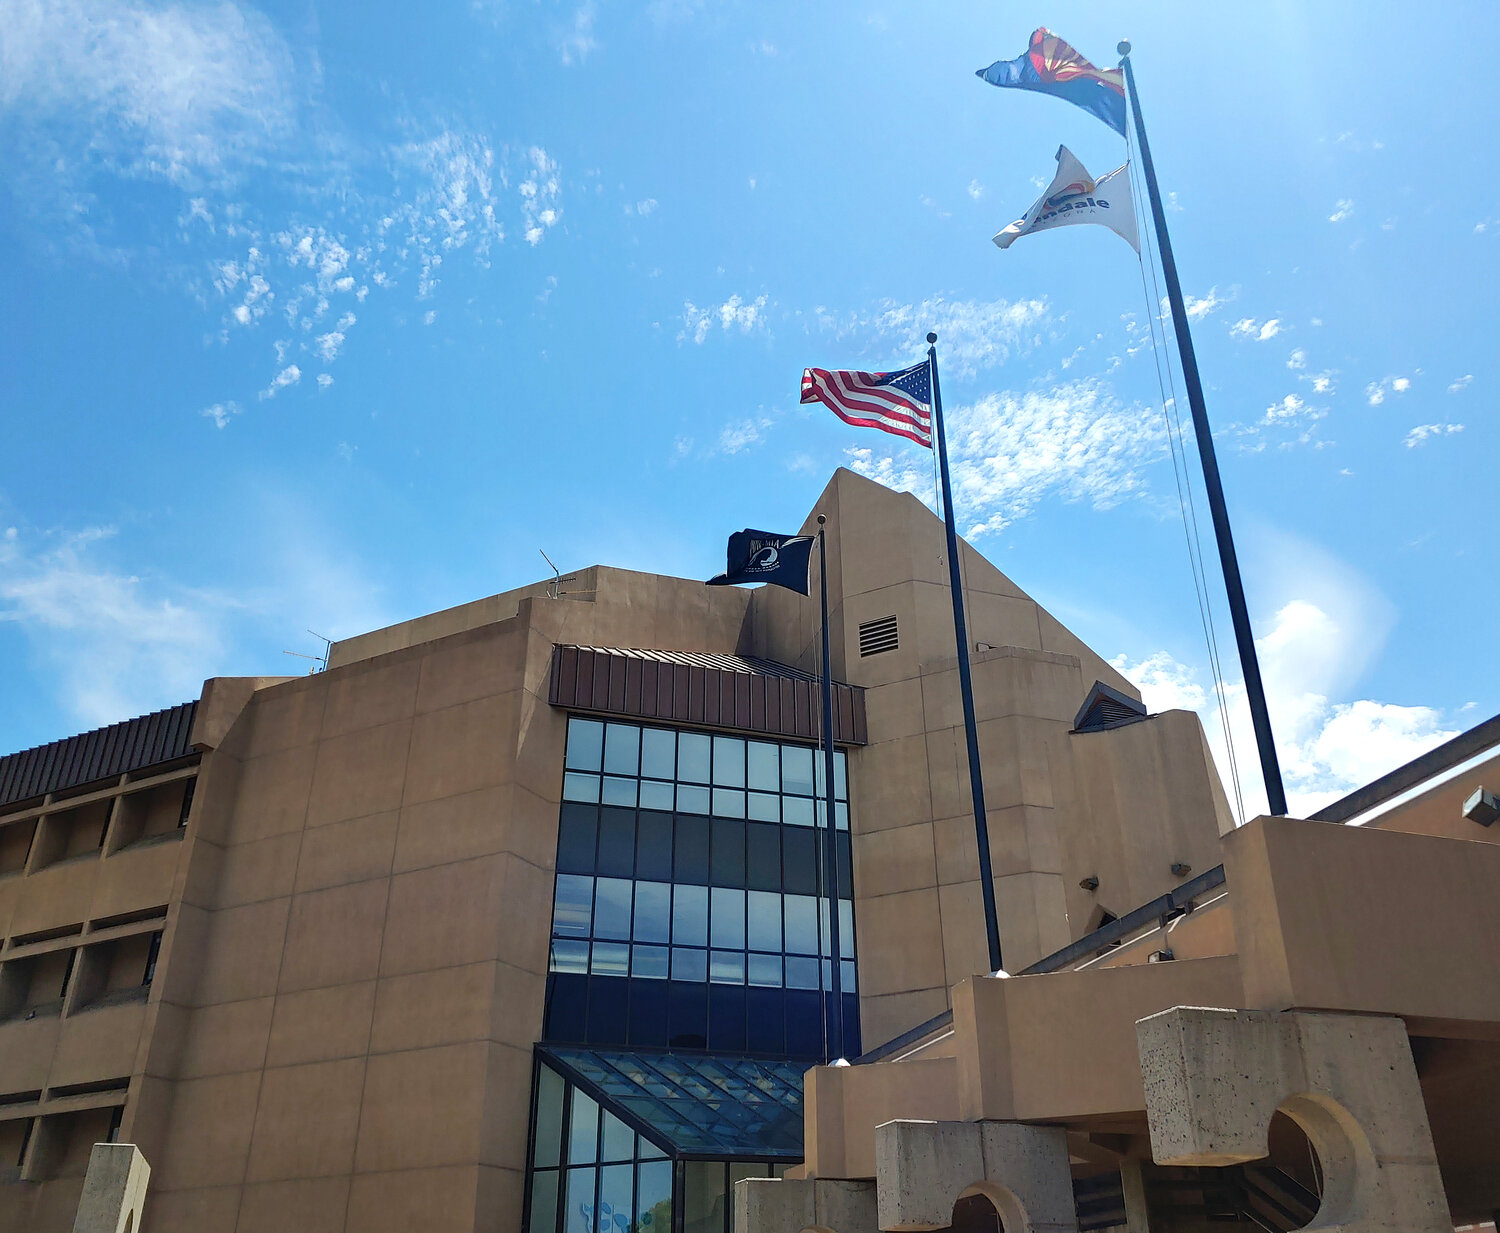 A look at Glendale City Hall, now undergoing renovations